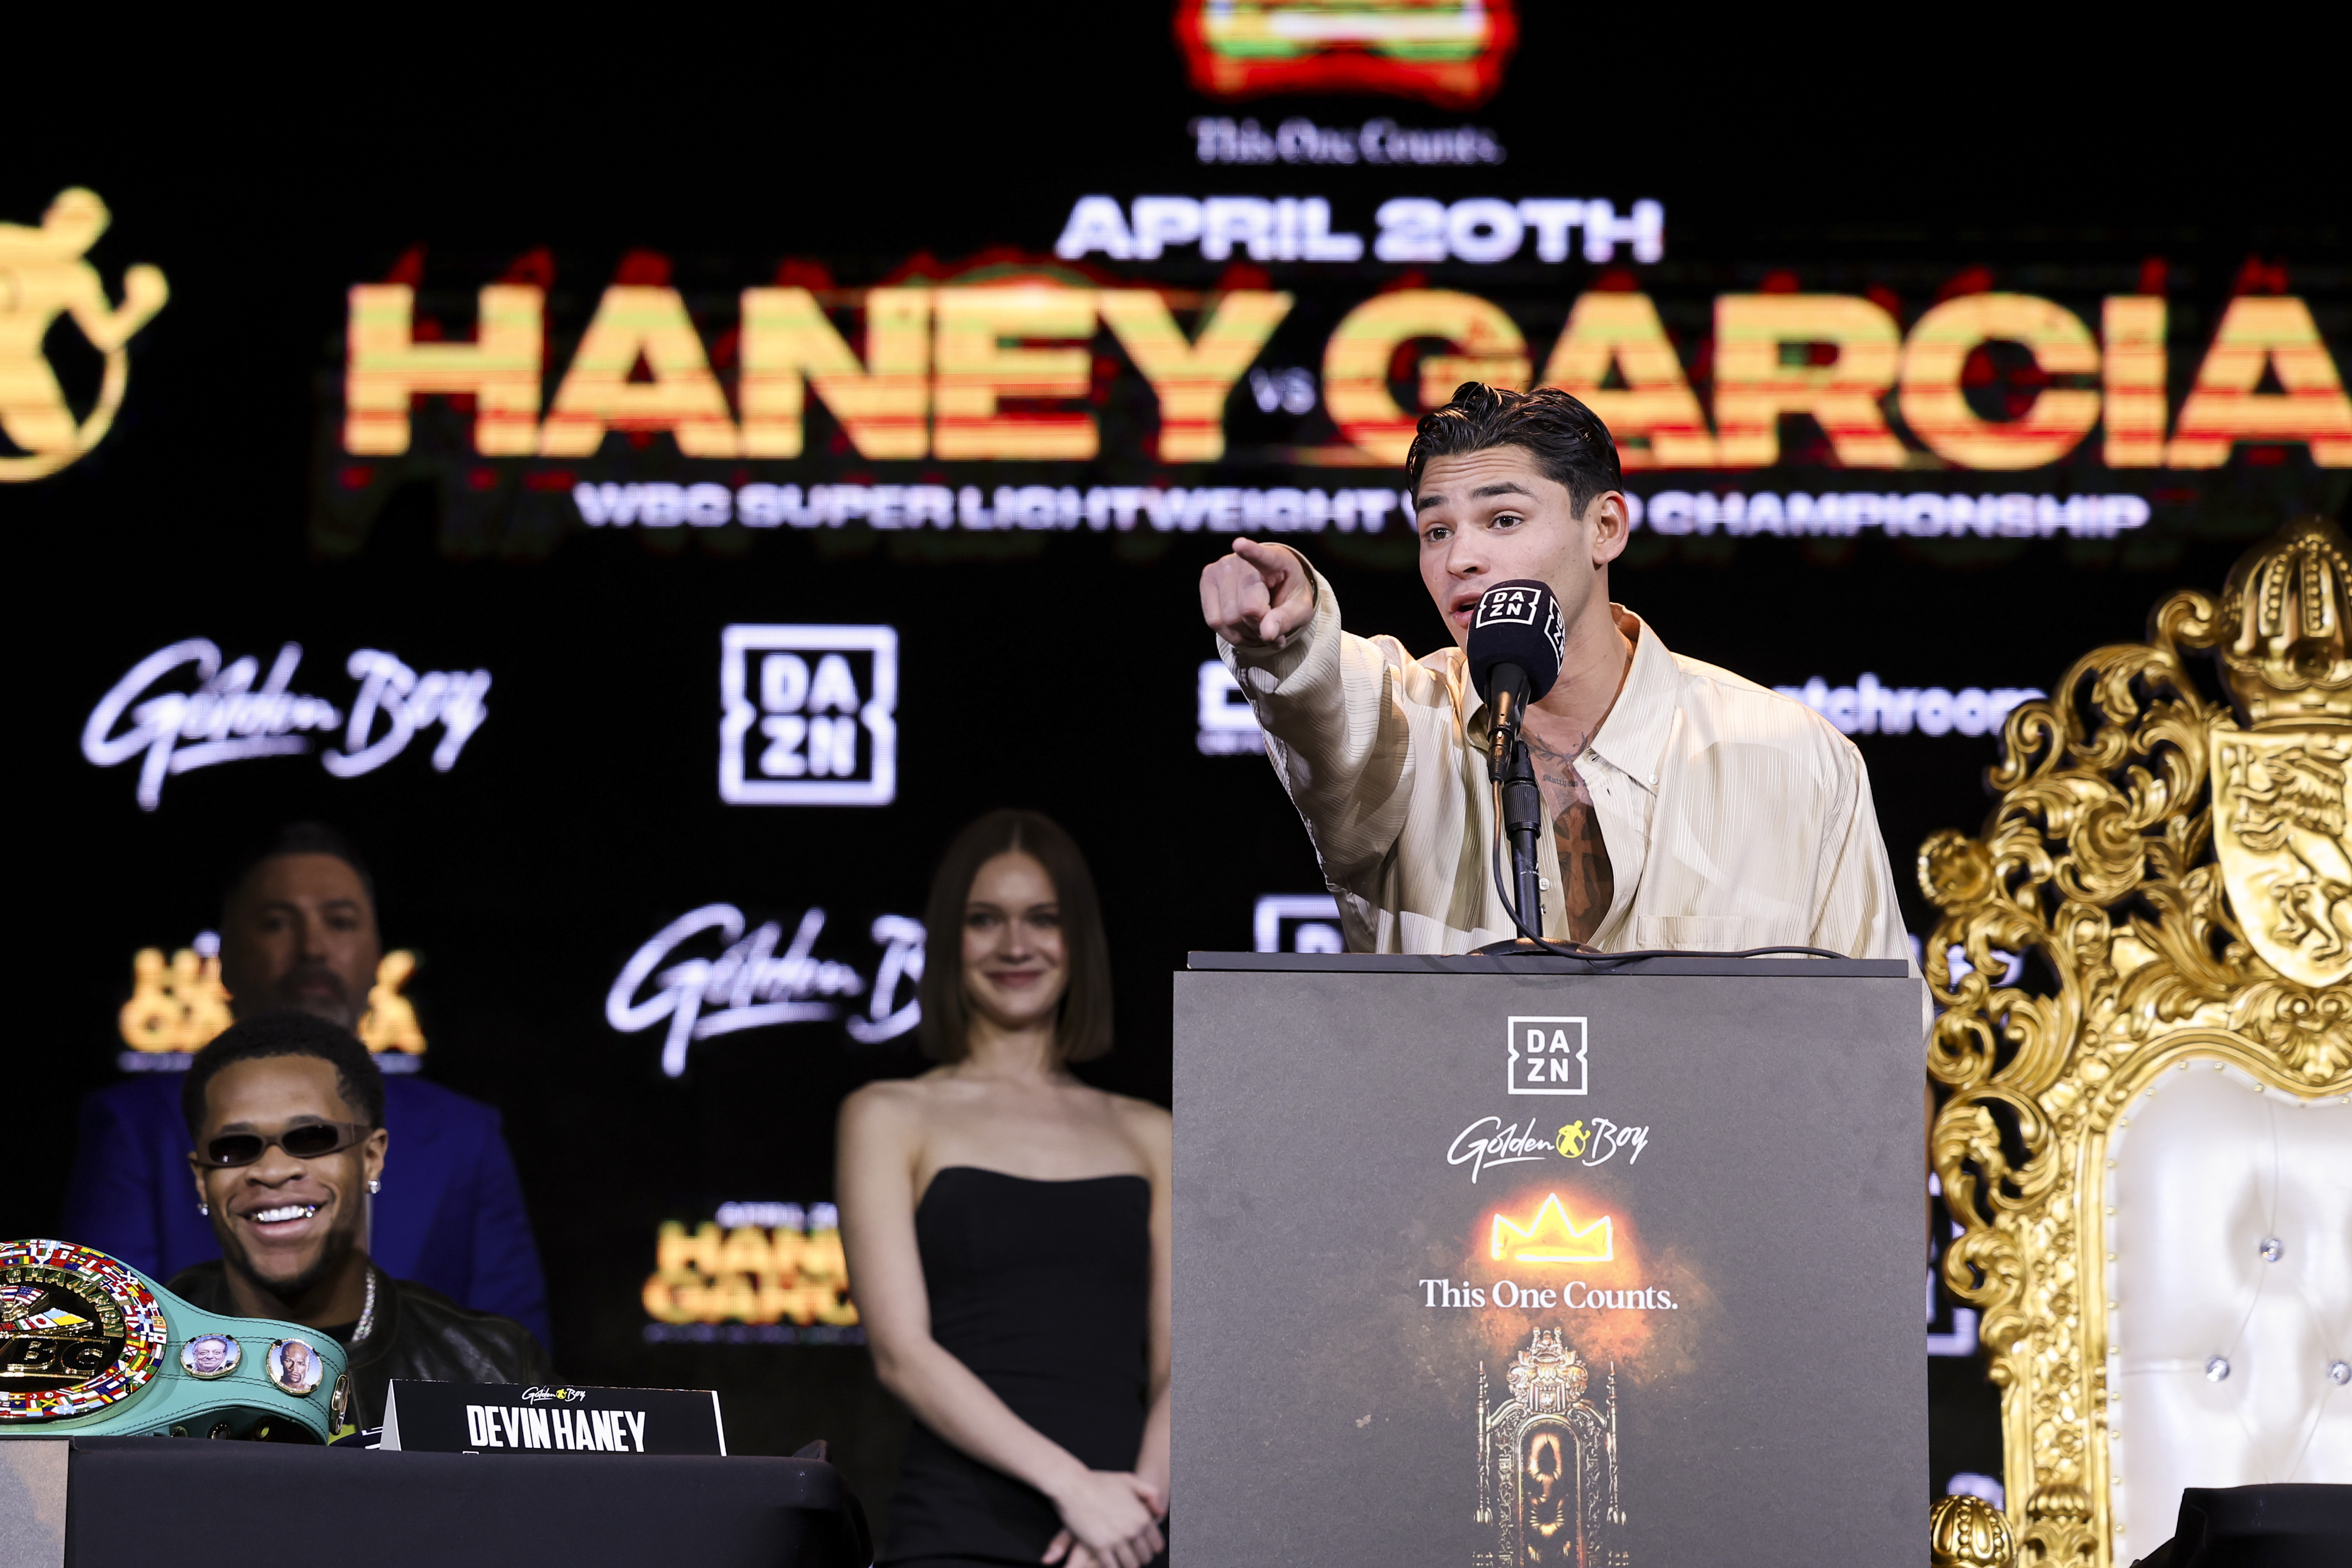 Ryan Garcia and Devin Haney appear for an opening press event for their upcoming fight.